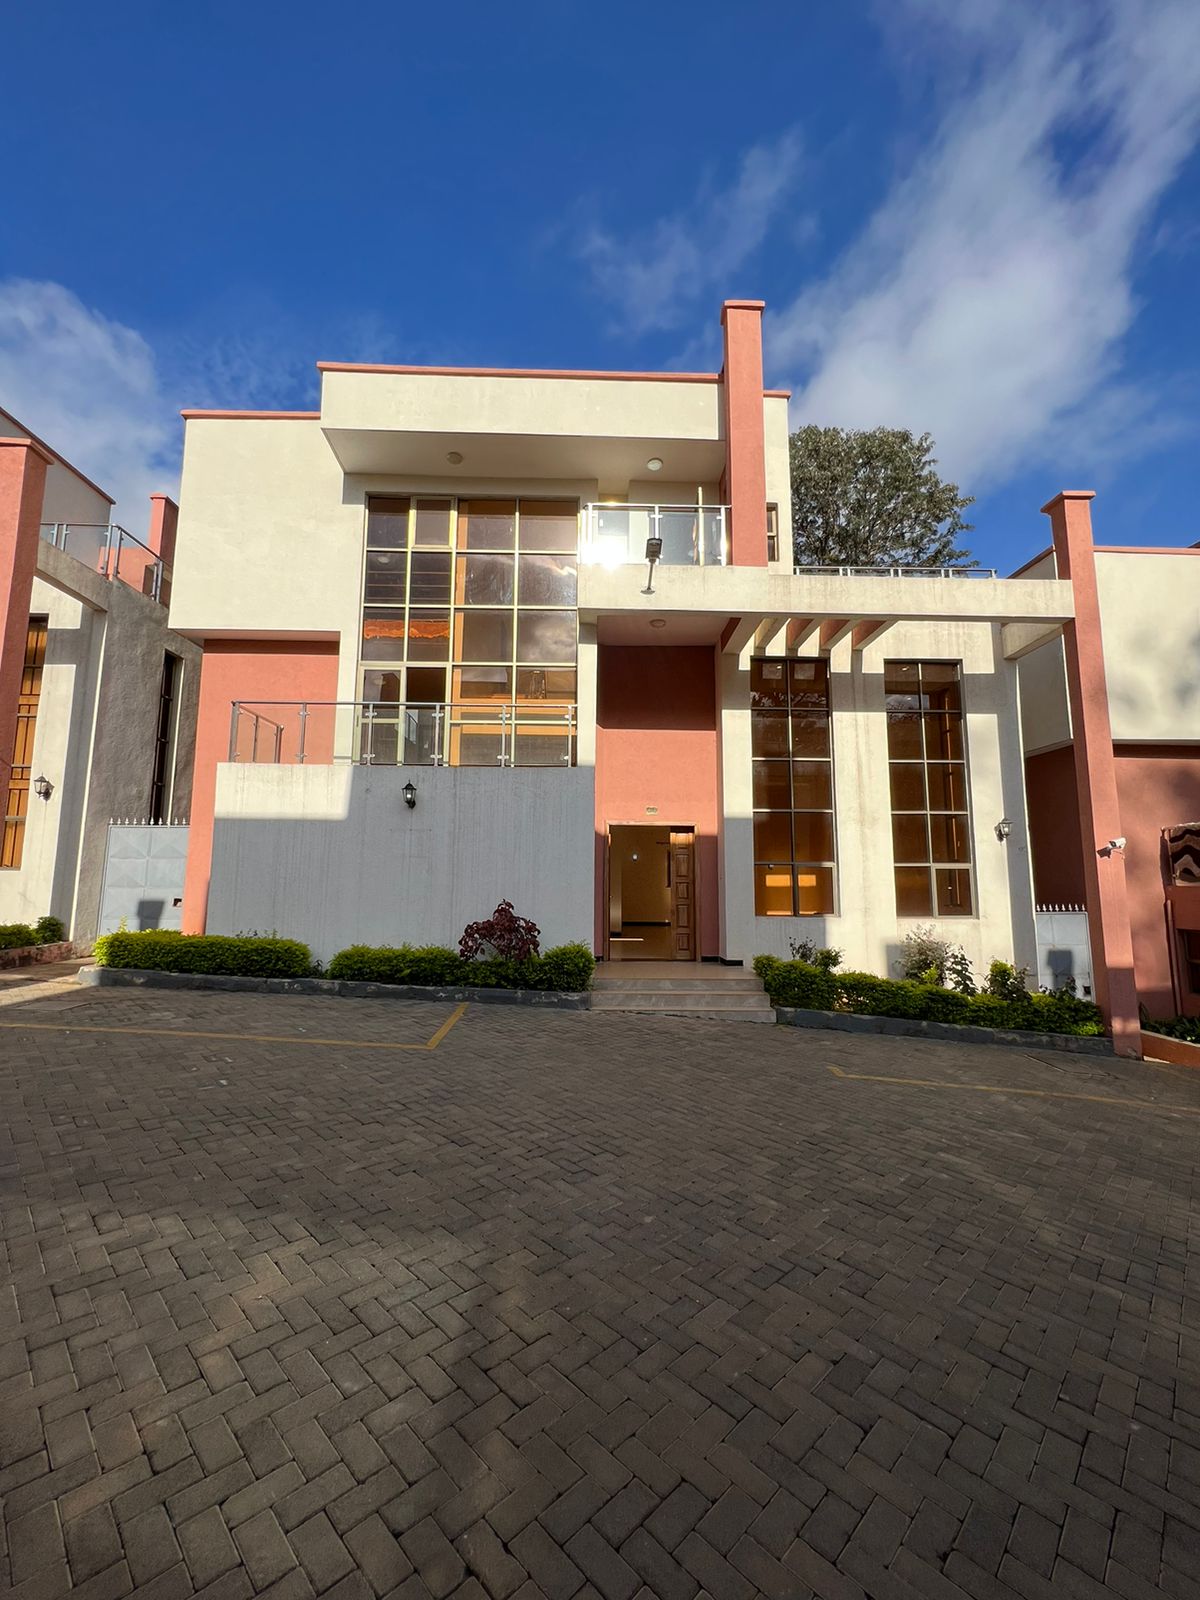 5 bedroom plus dsq townhouses for sale in Lavington, Nairobi. In a gated community. Sale at kshs 64Million negotiable Musilli Homes